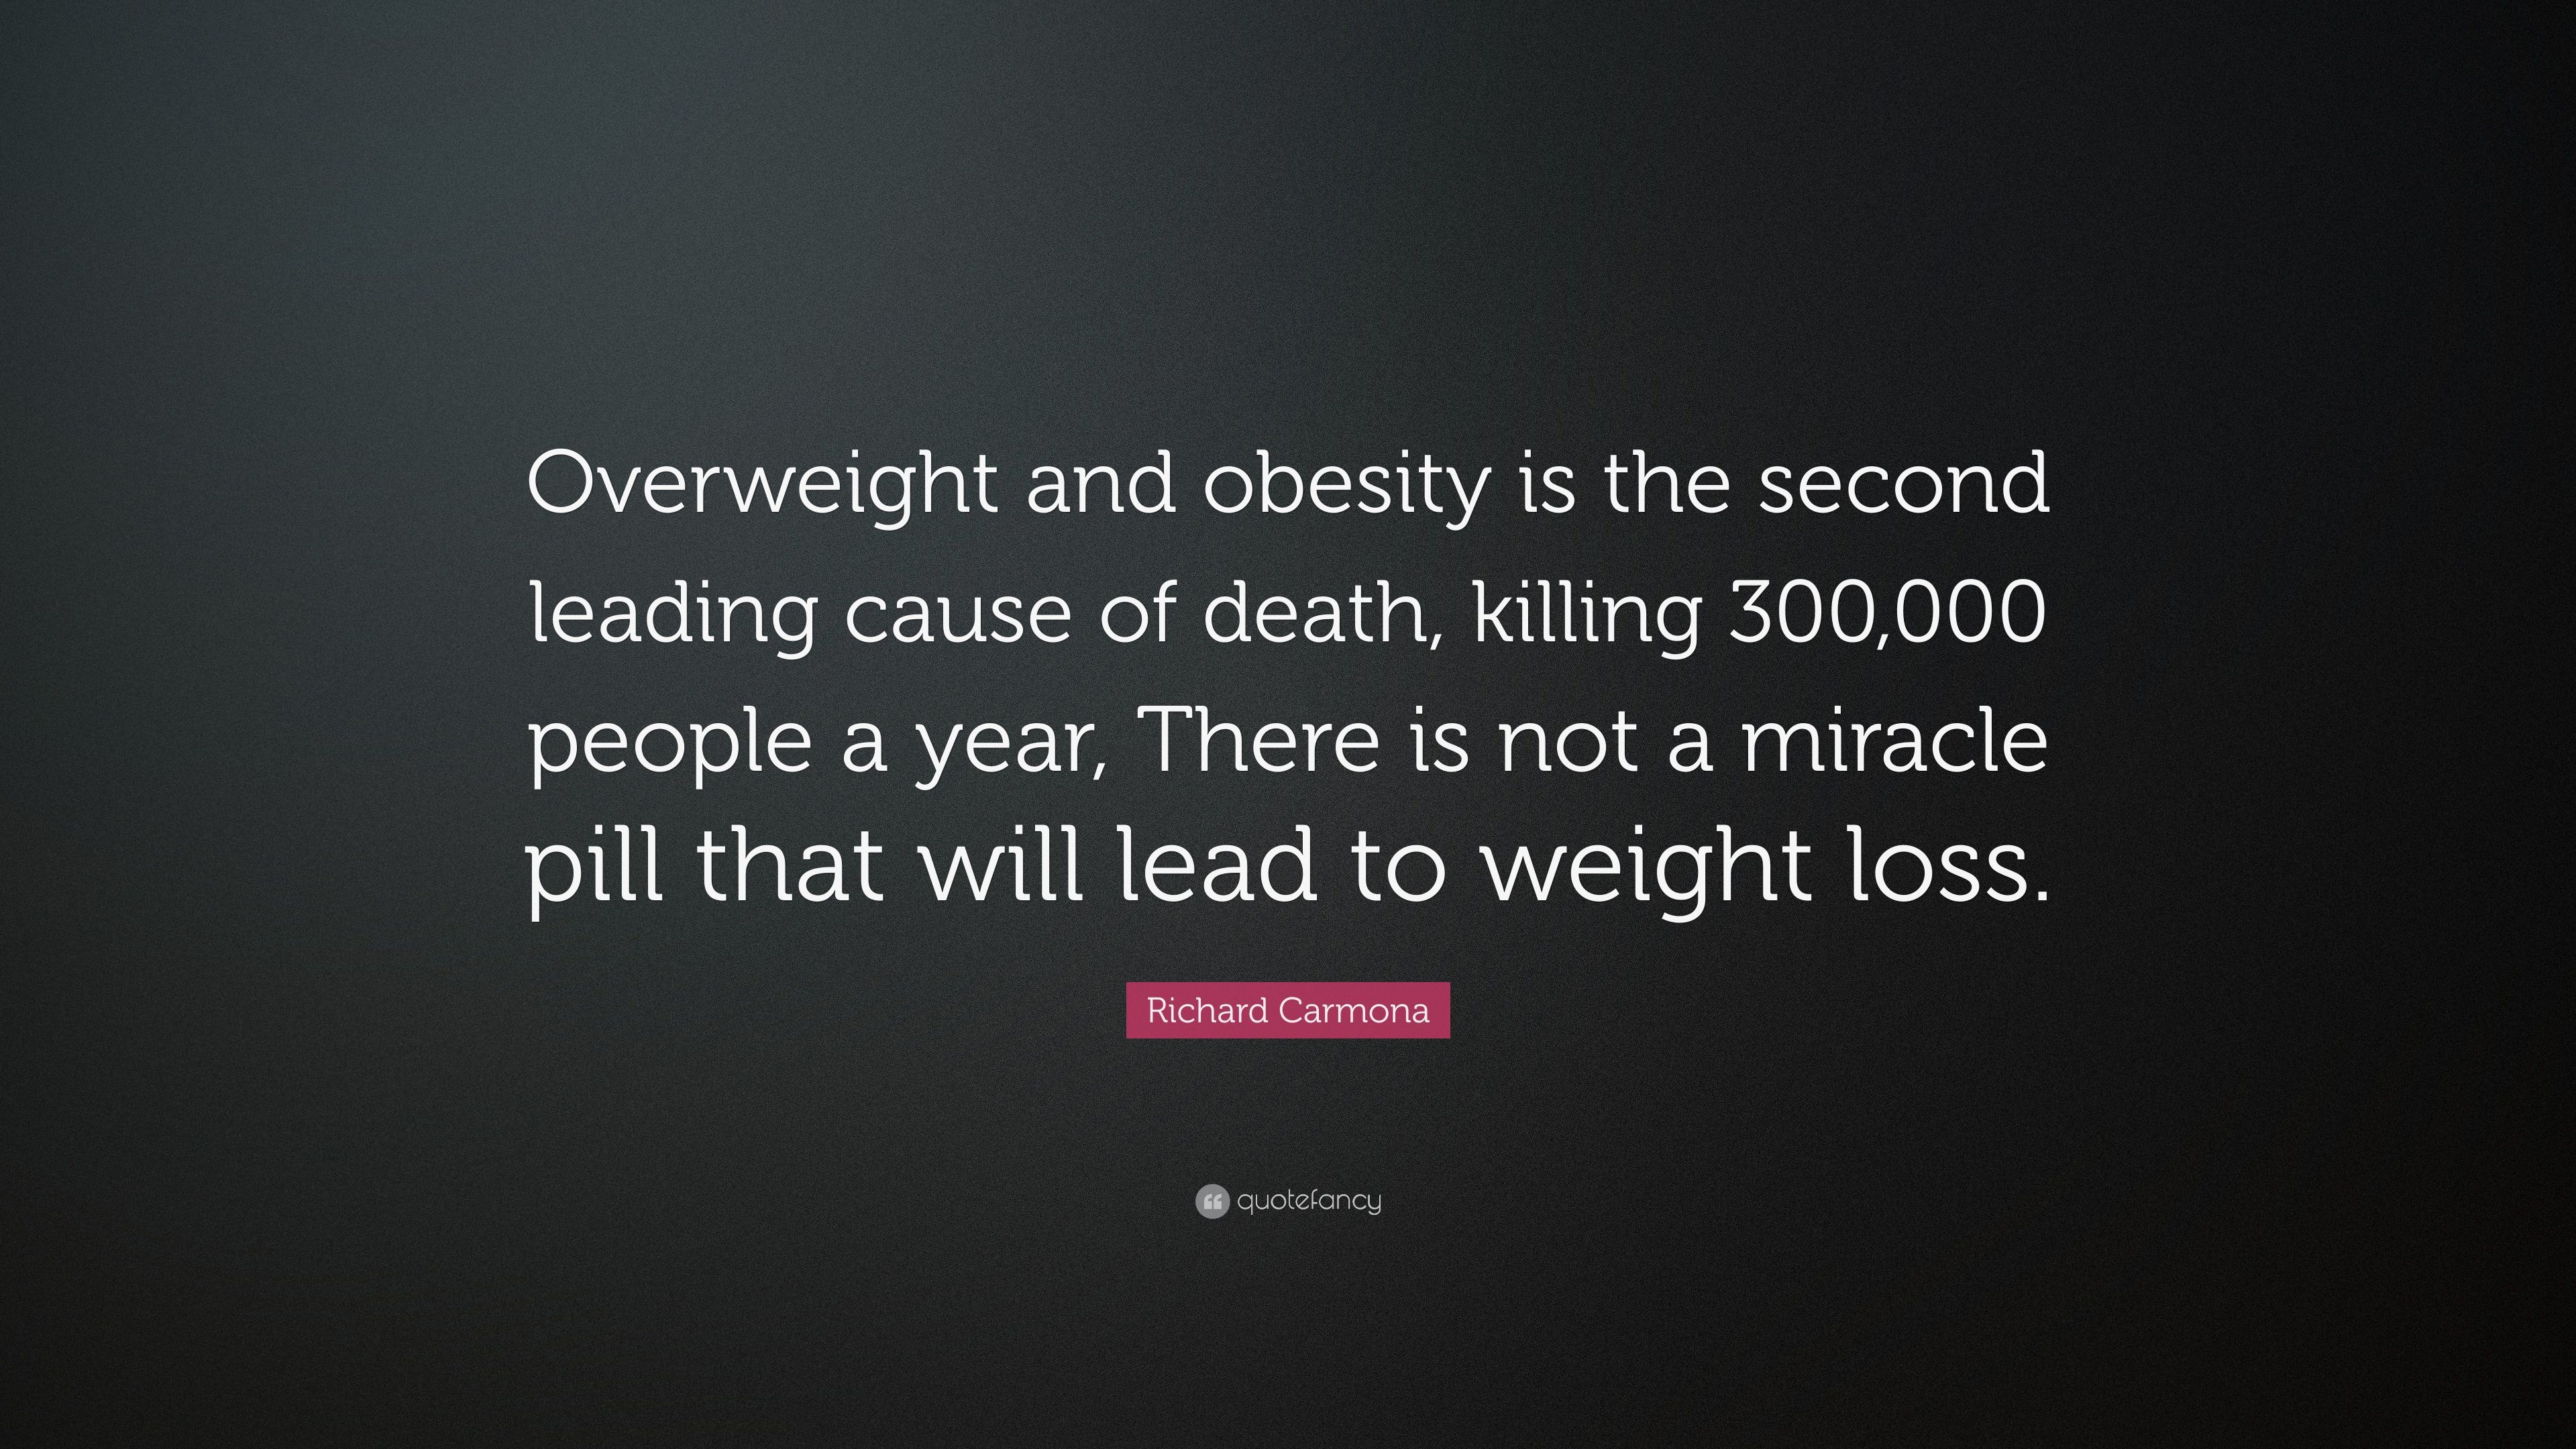 Richard Carmona Quote: “Overweight and .quotefancy.com